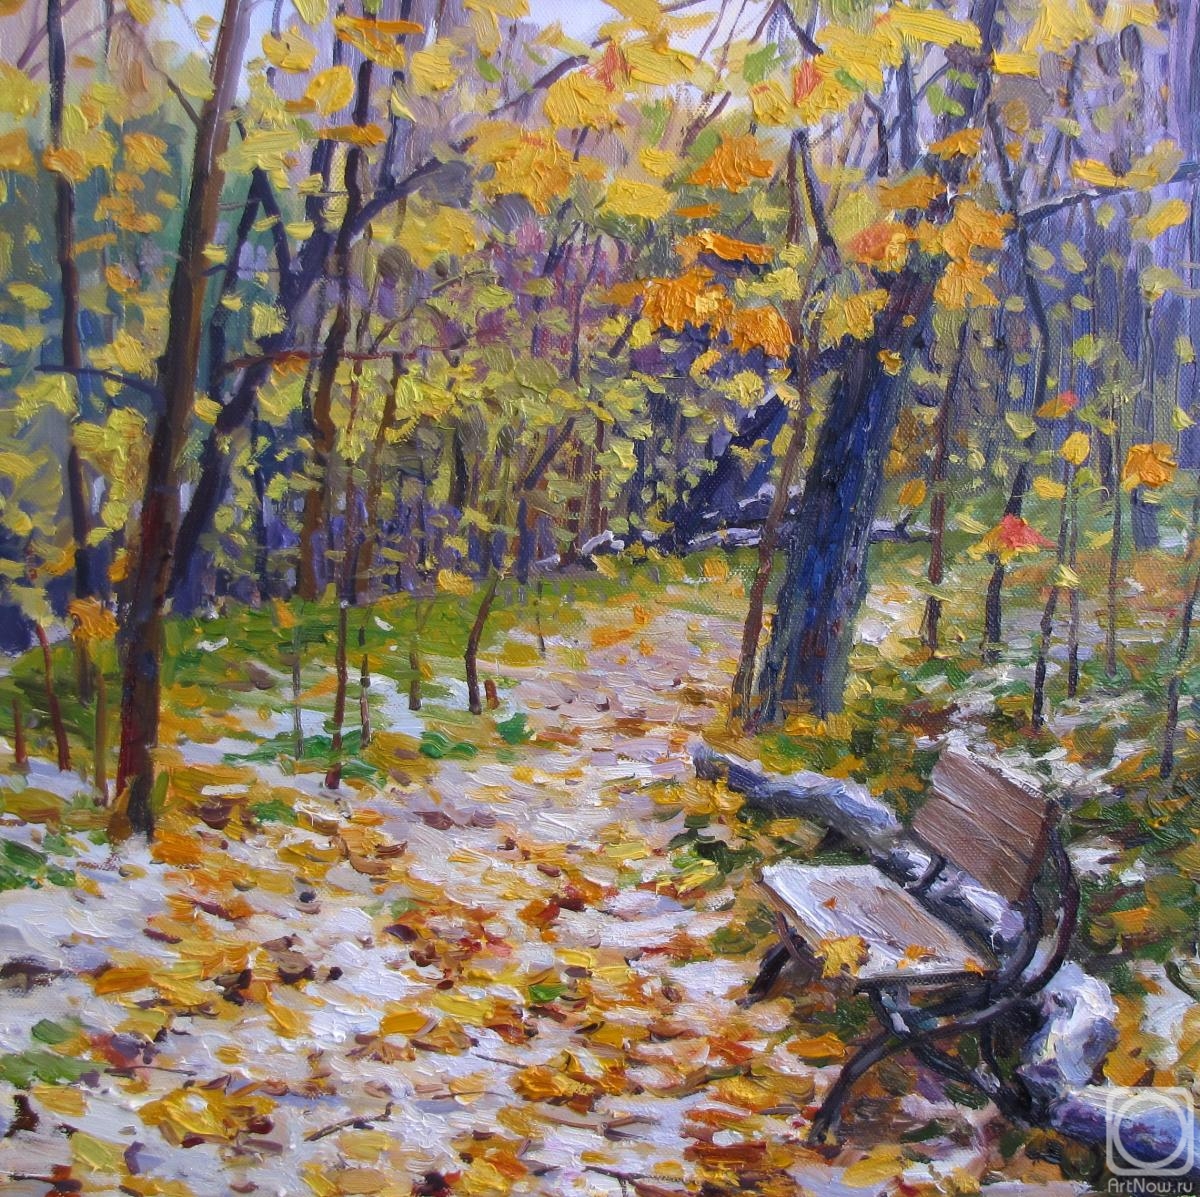 Rodionov Igor. The first snow is falling in the old park